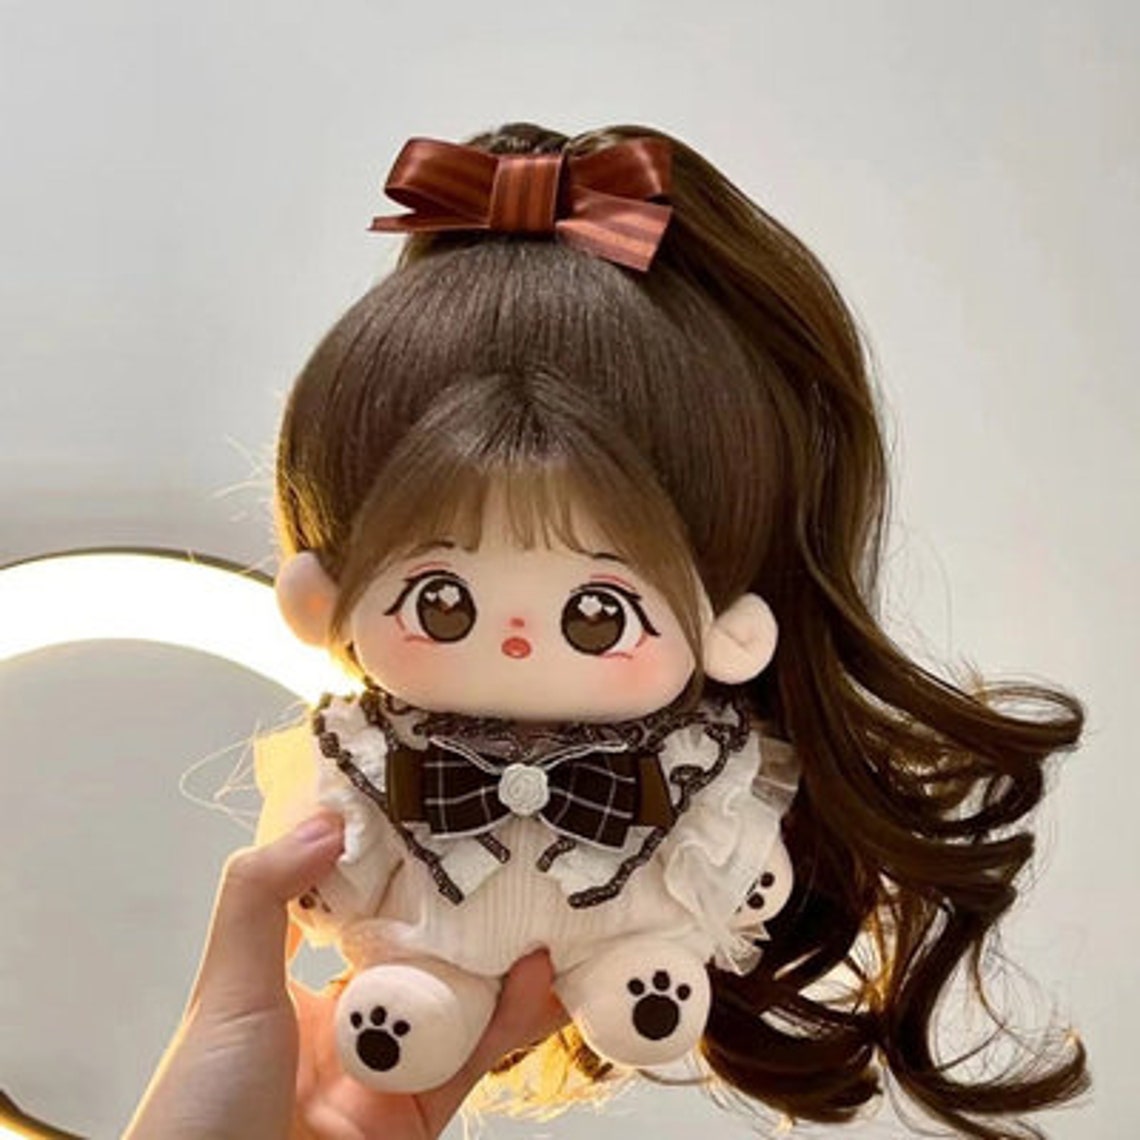 20cm Cotton Doll Kawaii Plush Dollclothes Not Included - Etsy